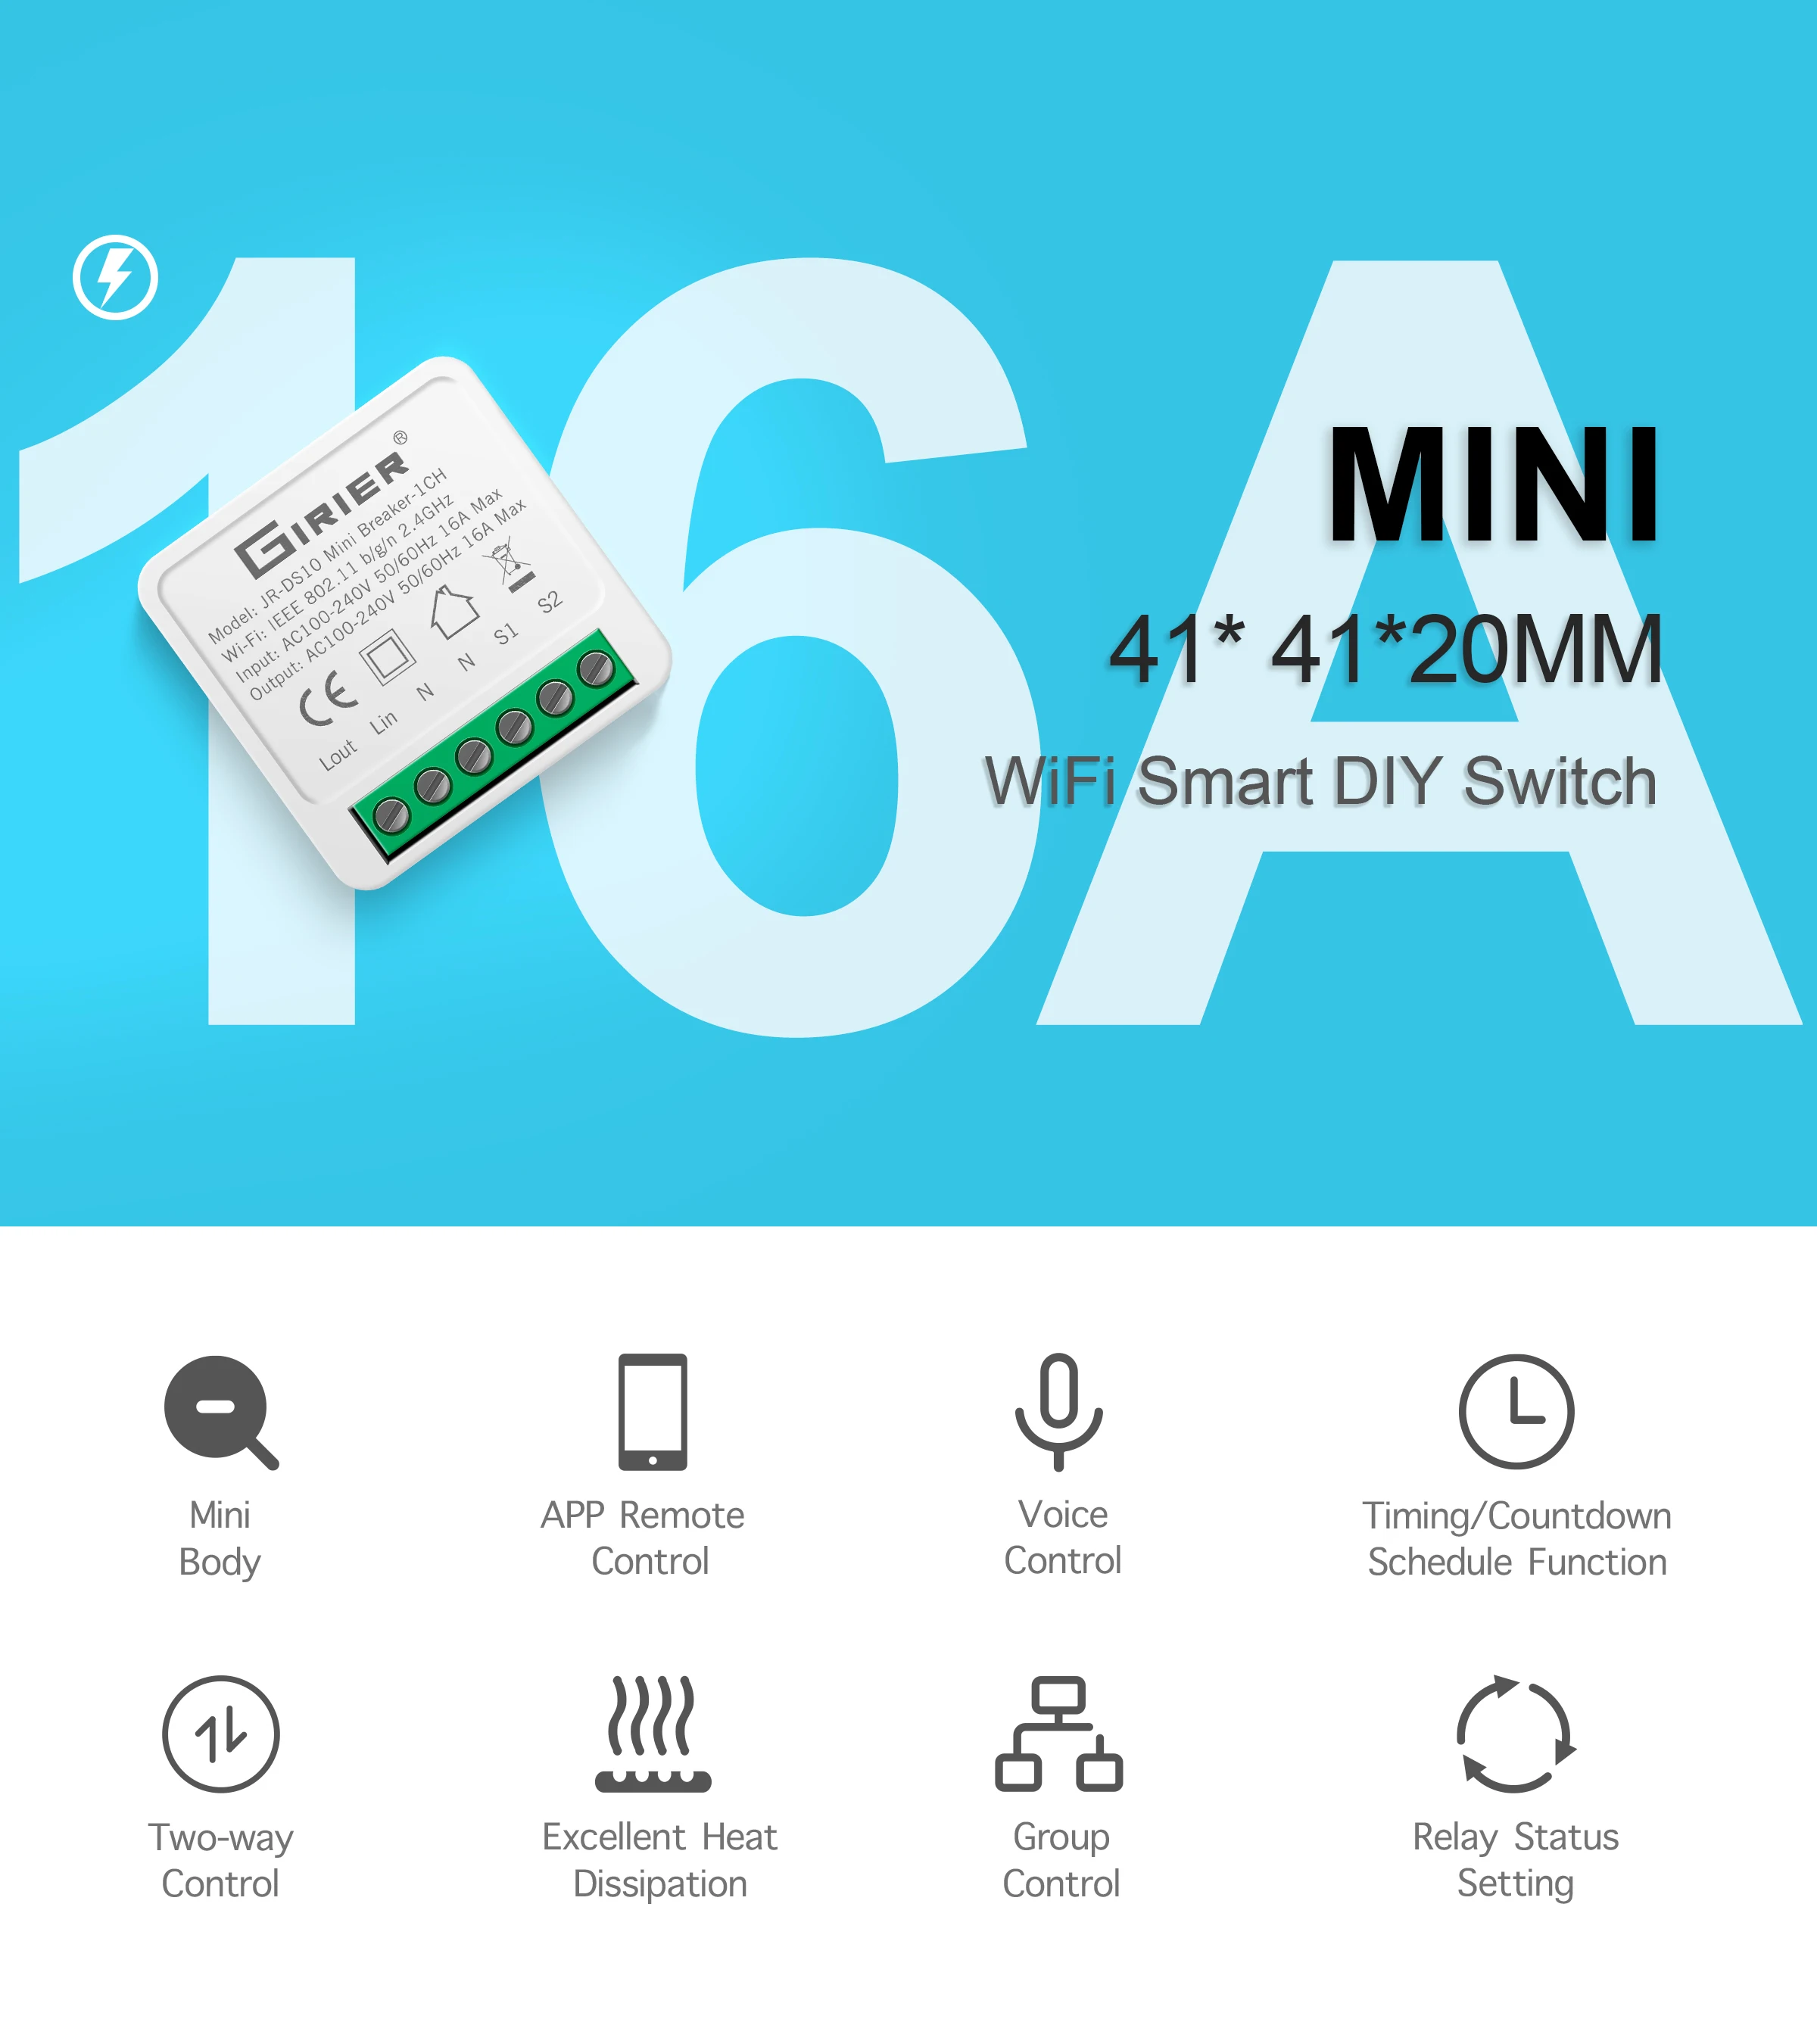 16A Mini Smart Wifi DIY Switch Supports 2 Way Control, Smart Home Automation Module, Works with Alexa Google Home Smart Life App